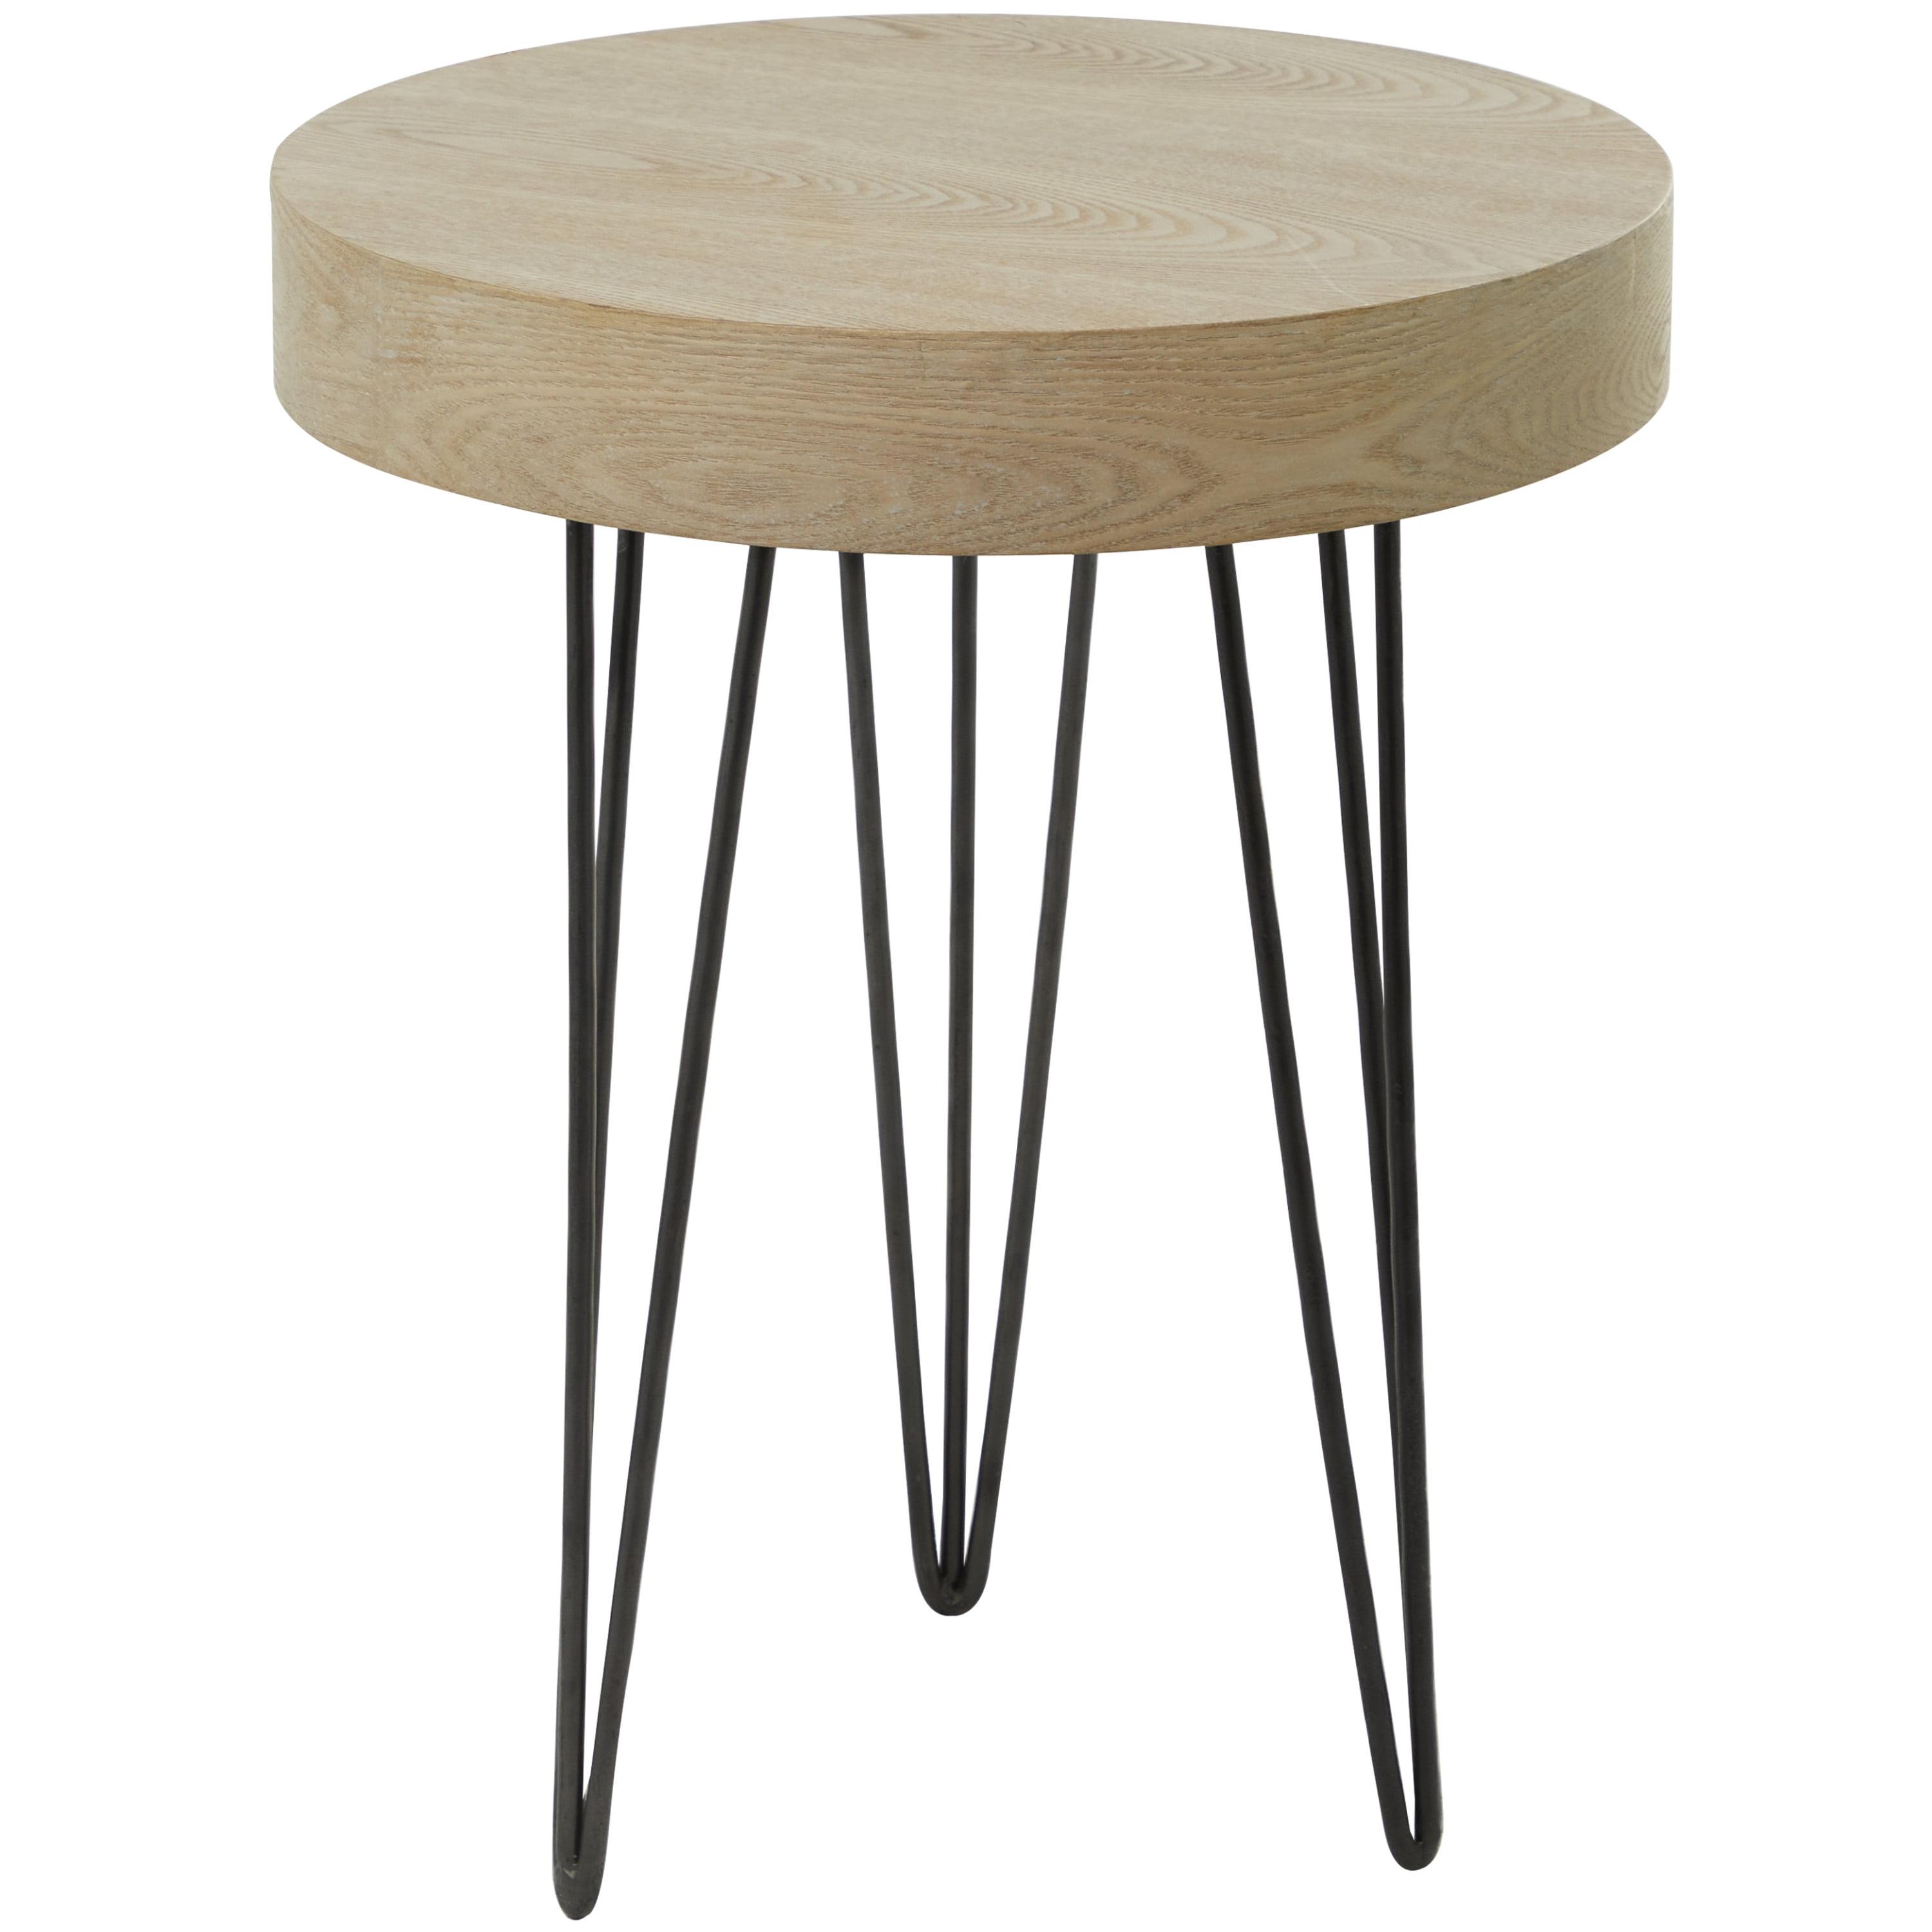 Elegant Round 20" Wood and Metal Accent Table in Brown